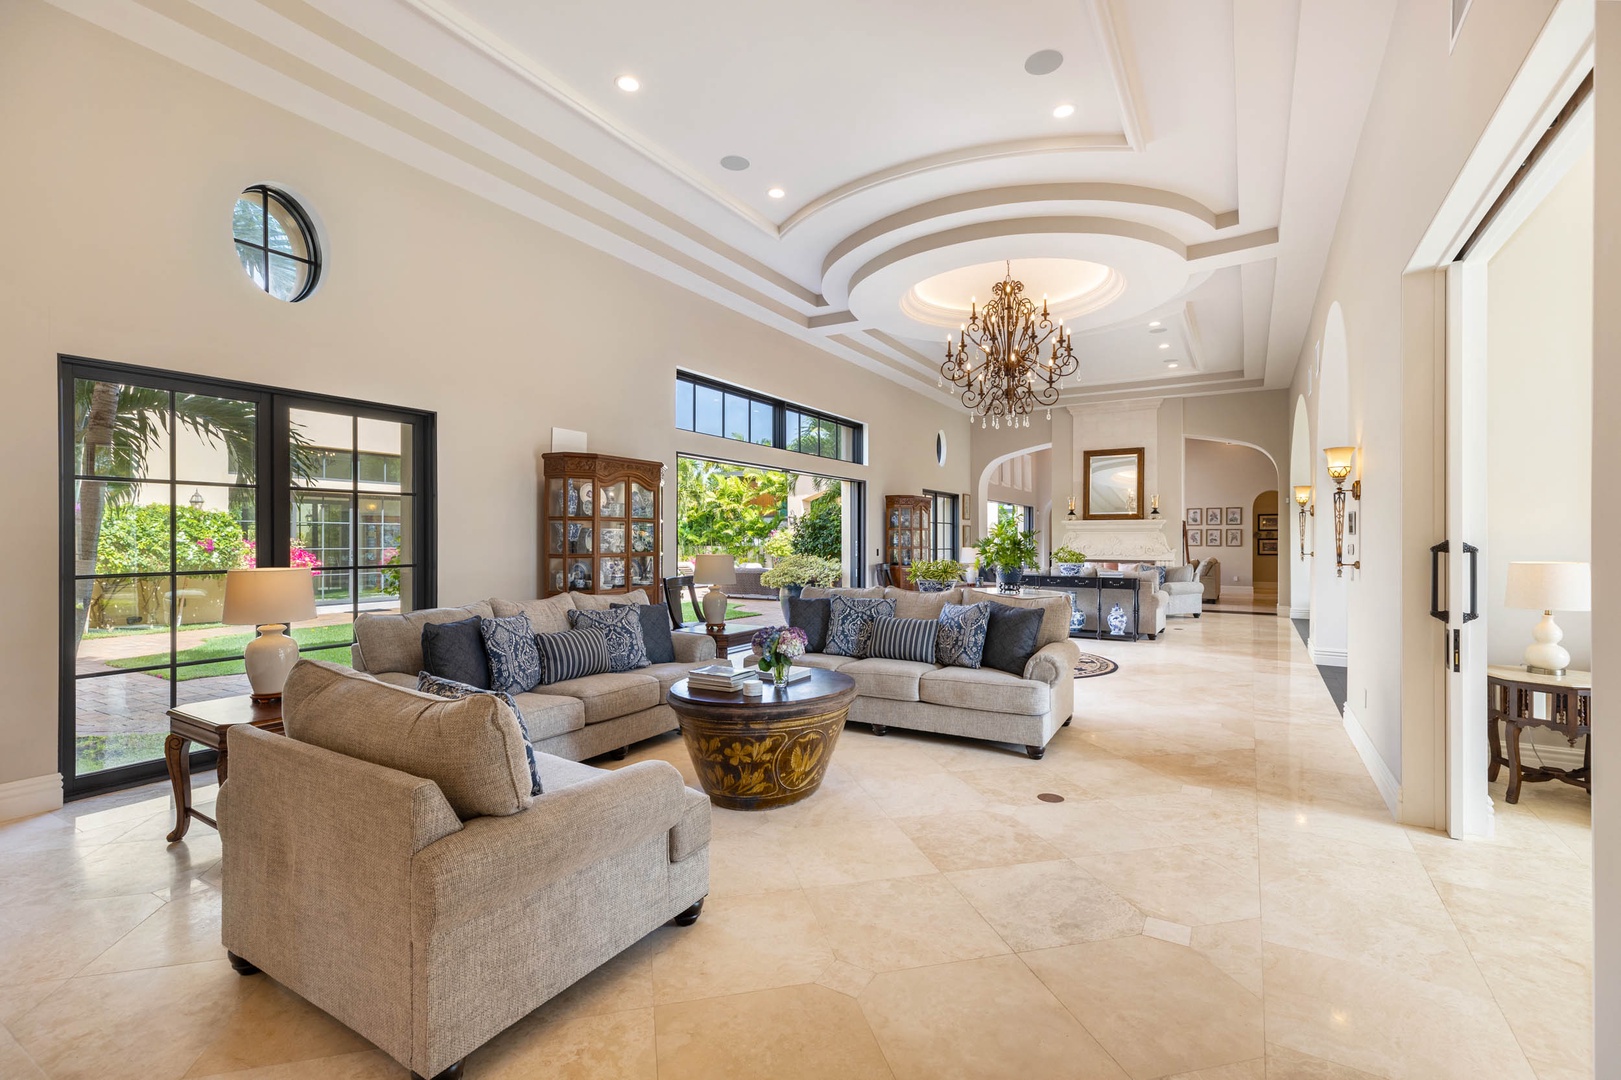 Honolulu Vacation Rentals, Royal Kahala Estate - Spacious and comfortable formal living area with modern sofas perfect for gatherings.